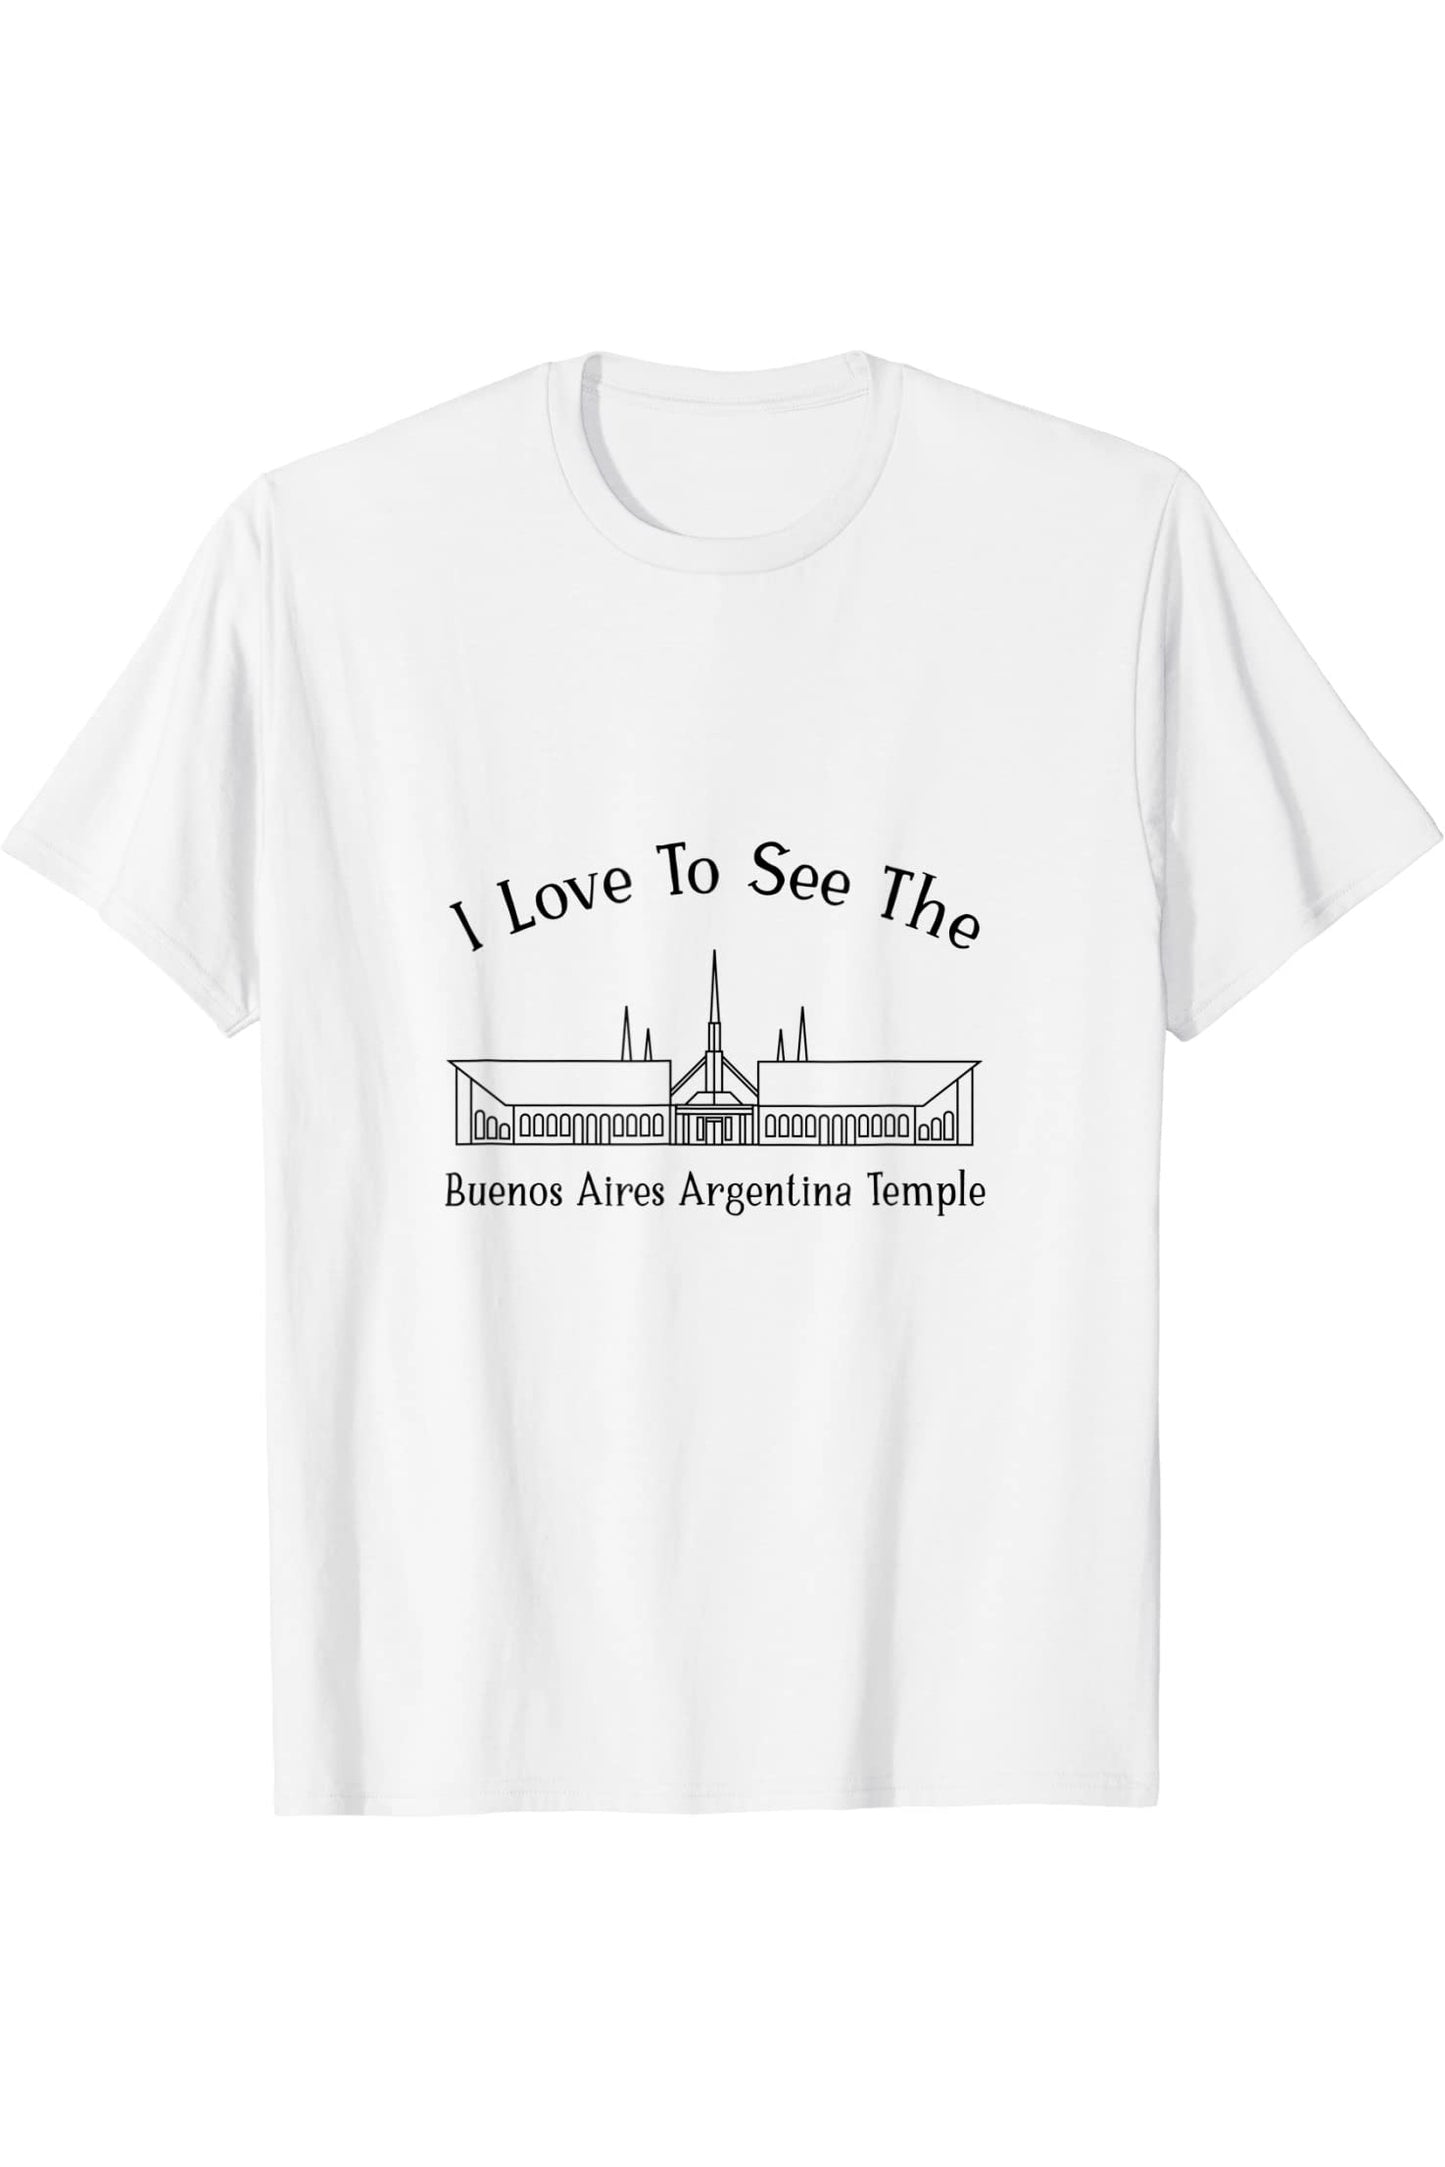 Buenos Aires Argentina Temple T-Shirt - Happy Style (English) US